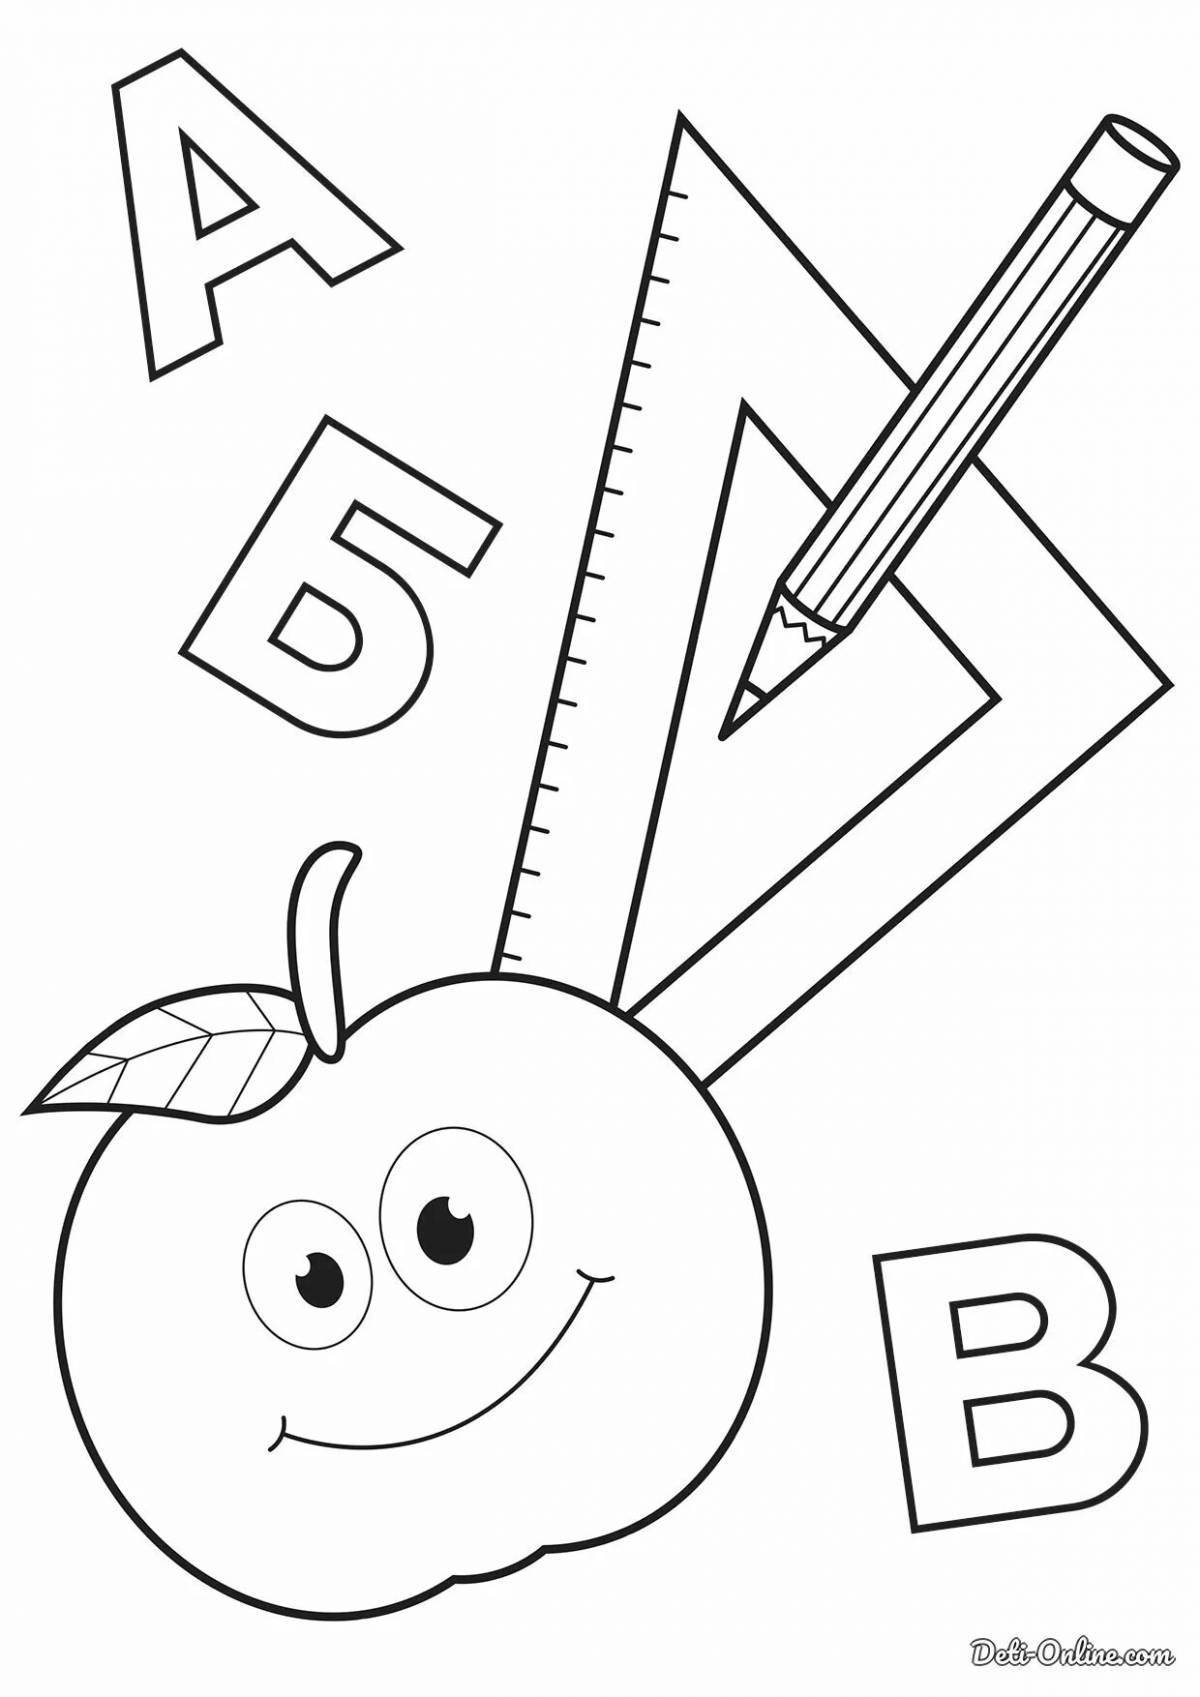 Crazy coloring book for first graders